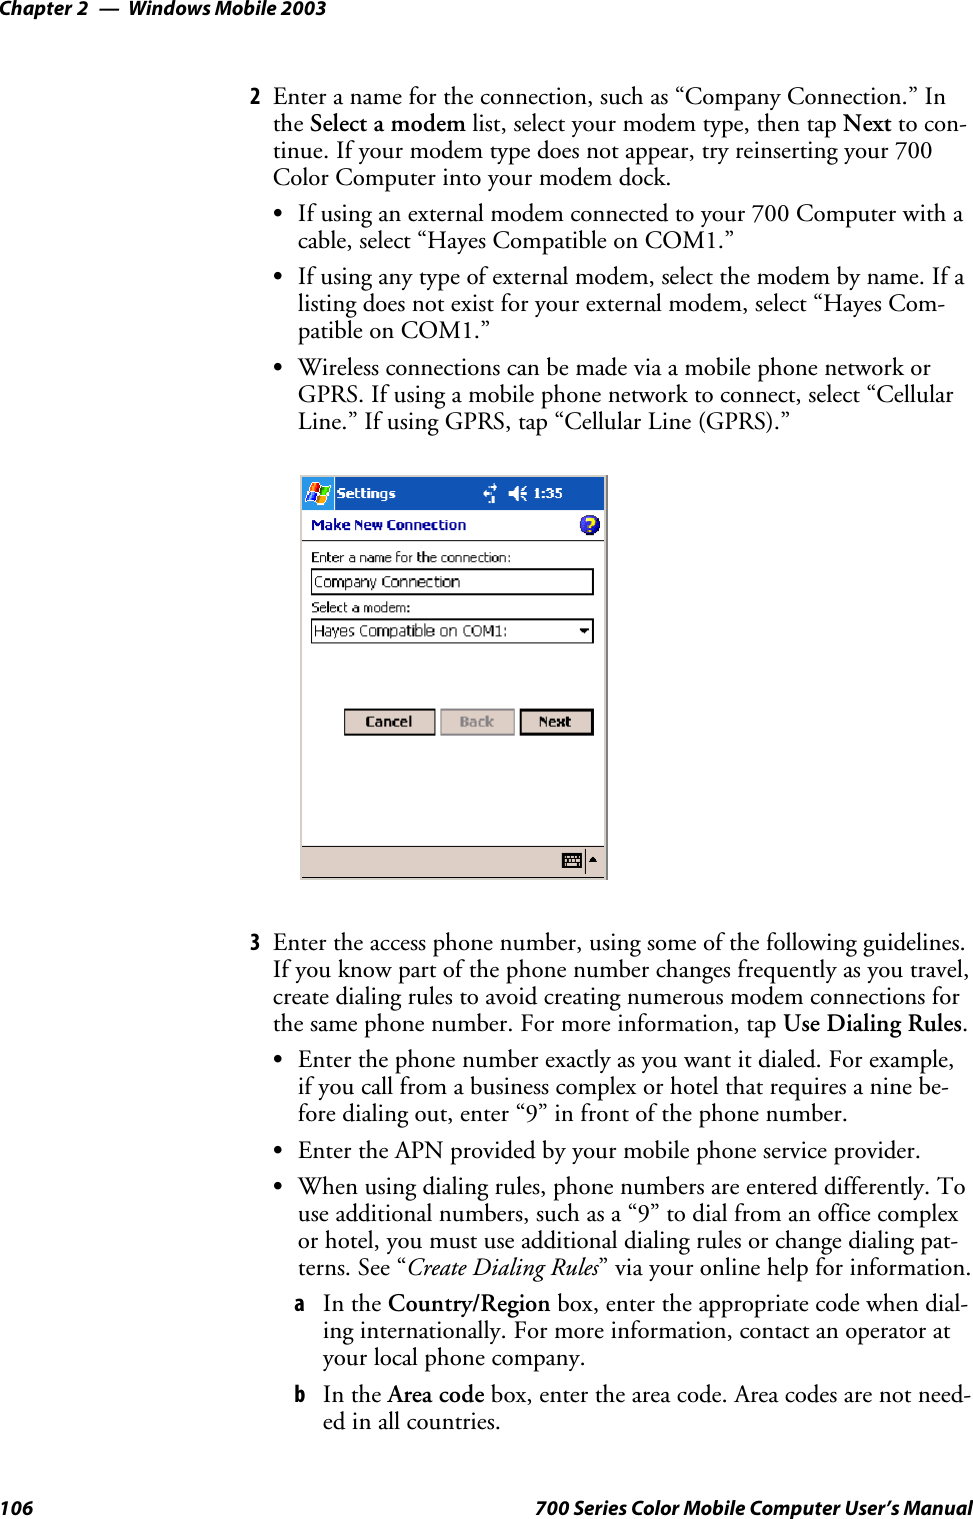 Windows Mobile 2003Chapter —2106 700 Series Color Mobile Computer User’s Manual2Enter a name for the connection, such as “Company Connection.” Inthe Select a modem list, select your modem type, then tap Next to con-tinue. If your modem type does not appear, try reinserting your 700ColorComputerintoyourmodemdock.SIf using an external modem connected to your 700 Computer with acable, select “Hayes Compatible on COM1.”SIf using any type of external modem, select the modem by name. If alisting does not exist for your external modem, select “Hayes Com-patible on COM1.”SWireless connections can be made via a mobile phone network orGPRS. If using a mobile phone network to connect, select “CellularLine.” If using GPRS, tap “Cellular Line (GPRS).”3Enter the access phone number, using some of the following guidelines.If you know part of the phone number changes frequently as you travel,create dialing rules to avoid creating numerous modem connections forthe same phone number. For more information, tap Use Dialing Rules.SEnterthephonenumberexactlyasyouwantitdialed.Forexample,if you call from a business complex or hotel that requires a nine be-fore dialing out, enter “9” in front of the phone number.SEnter the APN provided by your mobile phone service provider.SWhen using dialing rules, phone numbers are entered differently. Touse additional numbers, such as a “9” to dial from an office complexor hotel, you must use additional dialing rules or change dialing pat-terns. See “Create Dialing Rules” via your online help for information.aIn the Country/Region box, enter the appropriate code when dial-ing internationally. For more information, contact an operator atyour local phone company.bIn the Area code box, enter the area code. Area codes are not need-ed in all countries.